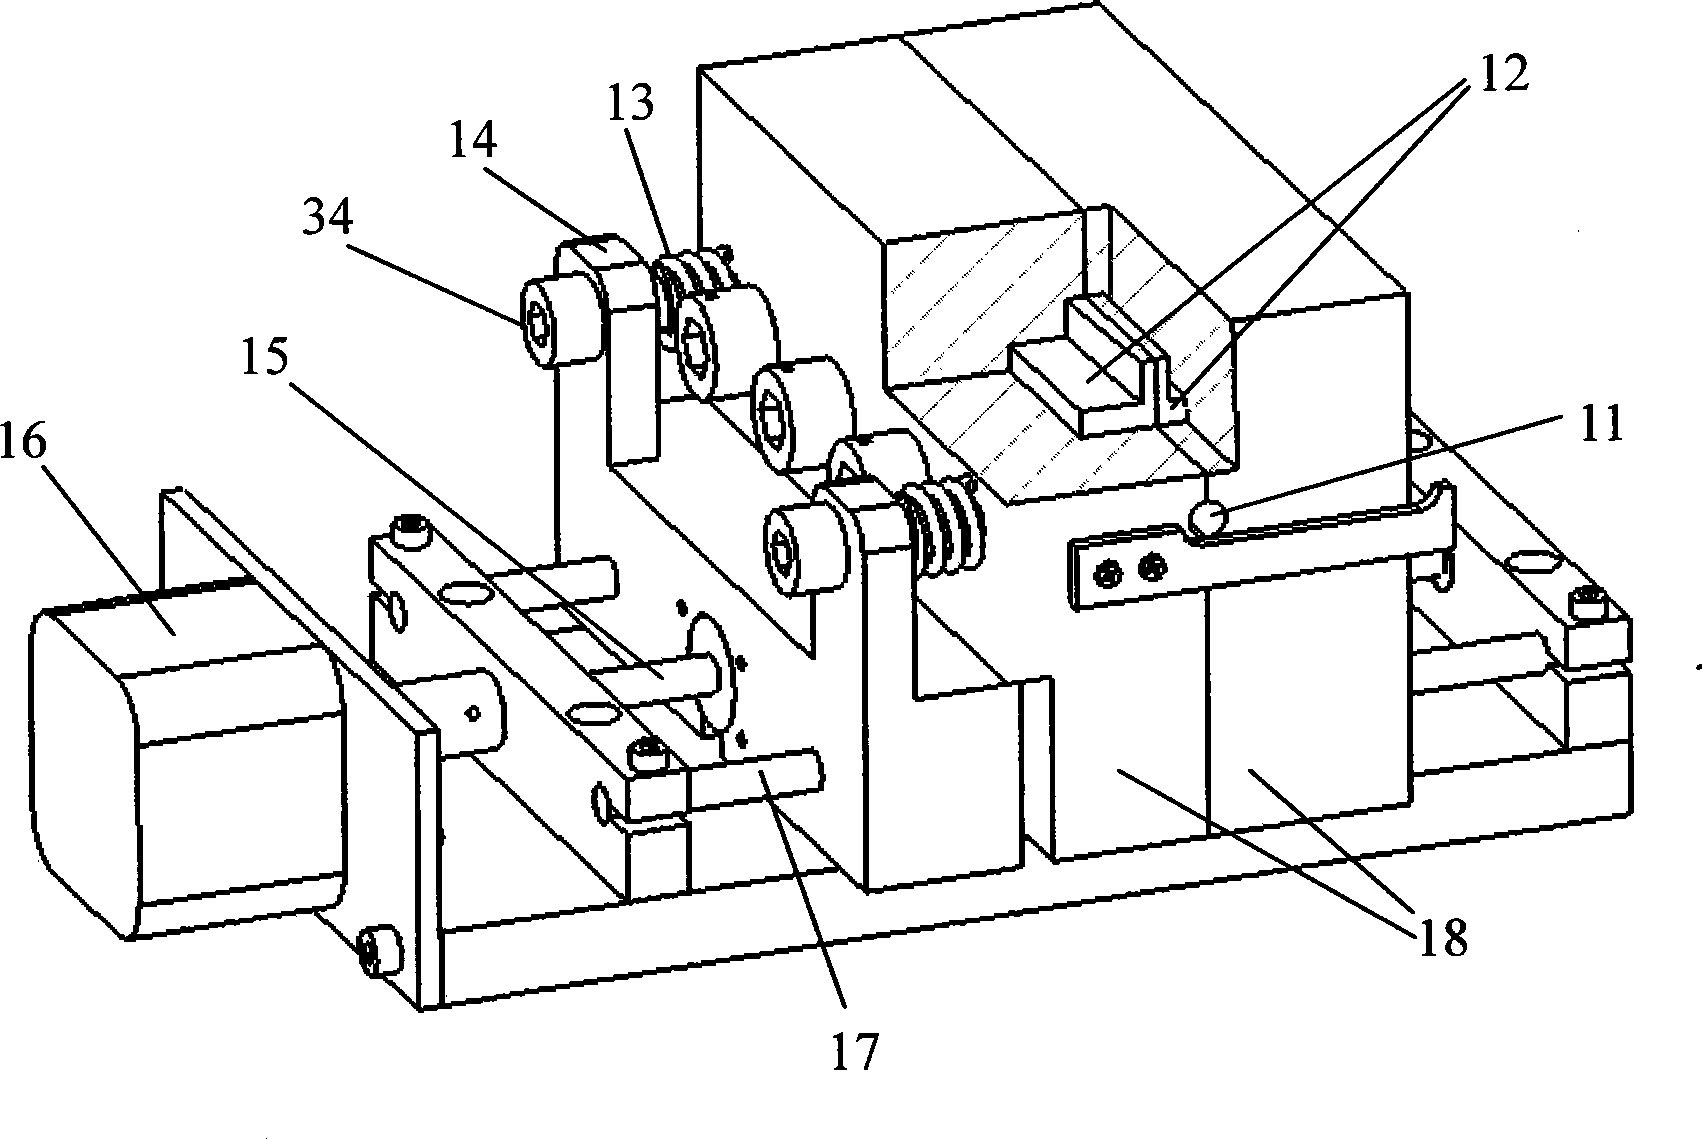 Integrated measurement device and method for heat pipe performance